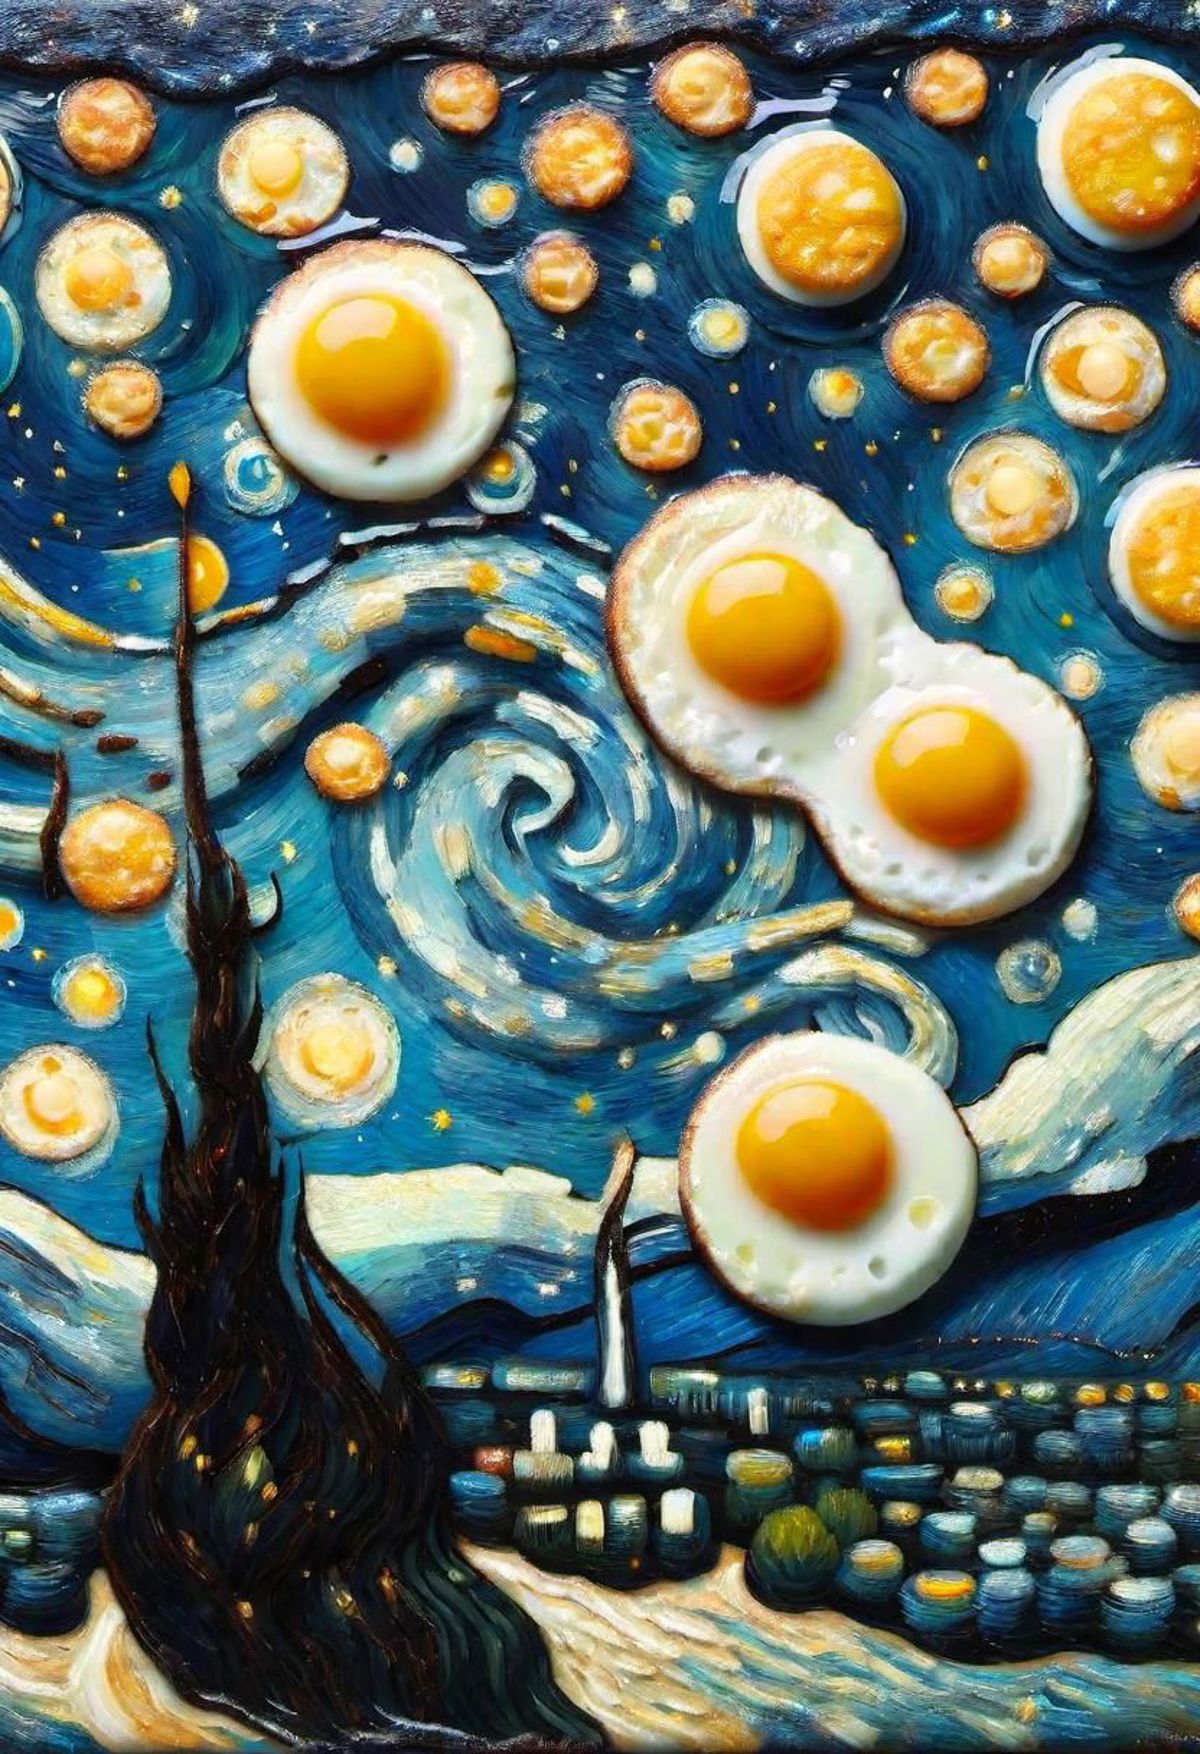 Artistic Food Arrangement with Two Eggs and a Starry Night Background